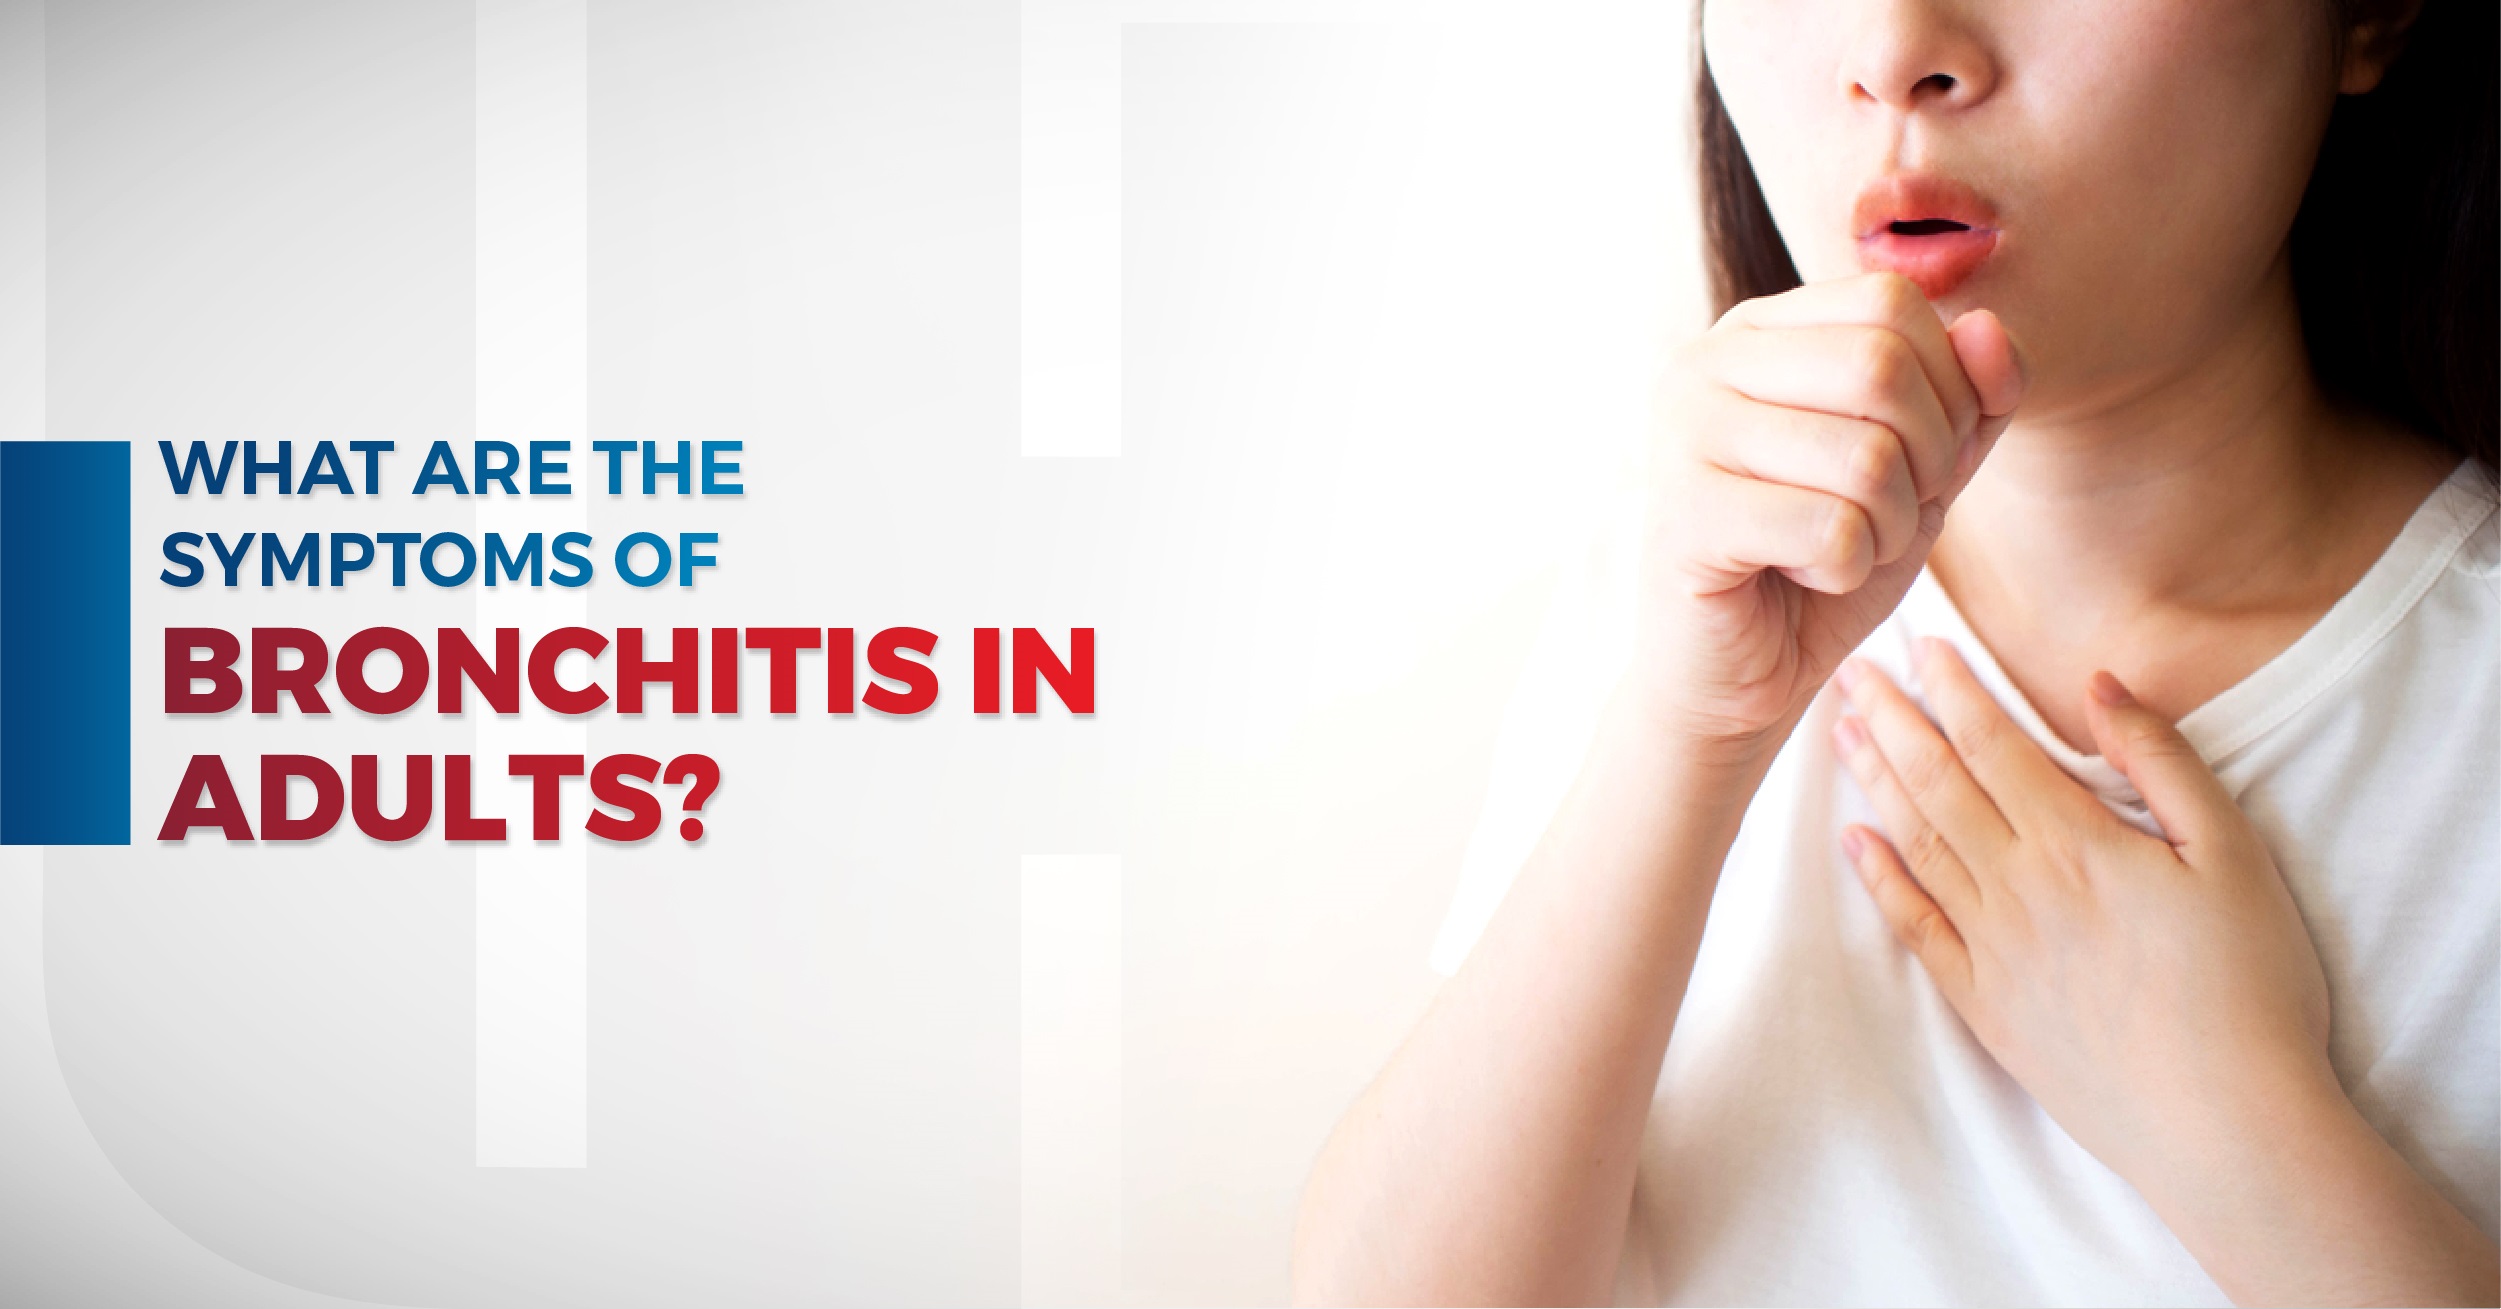 What Are The Symptoms Of Bronchitis In Adults